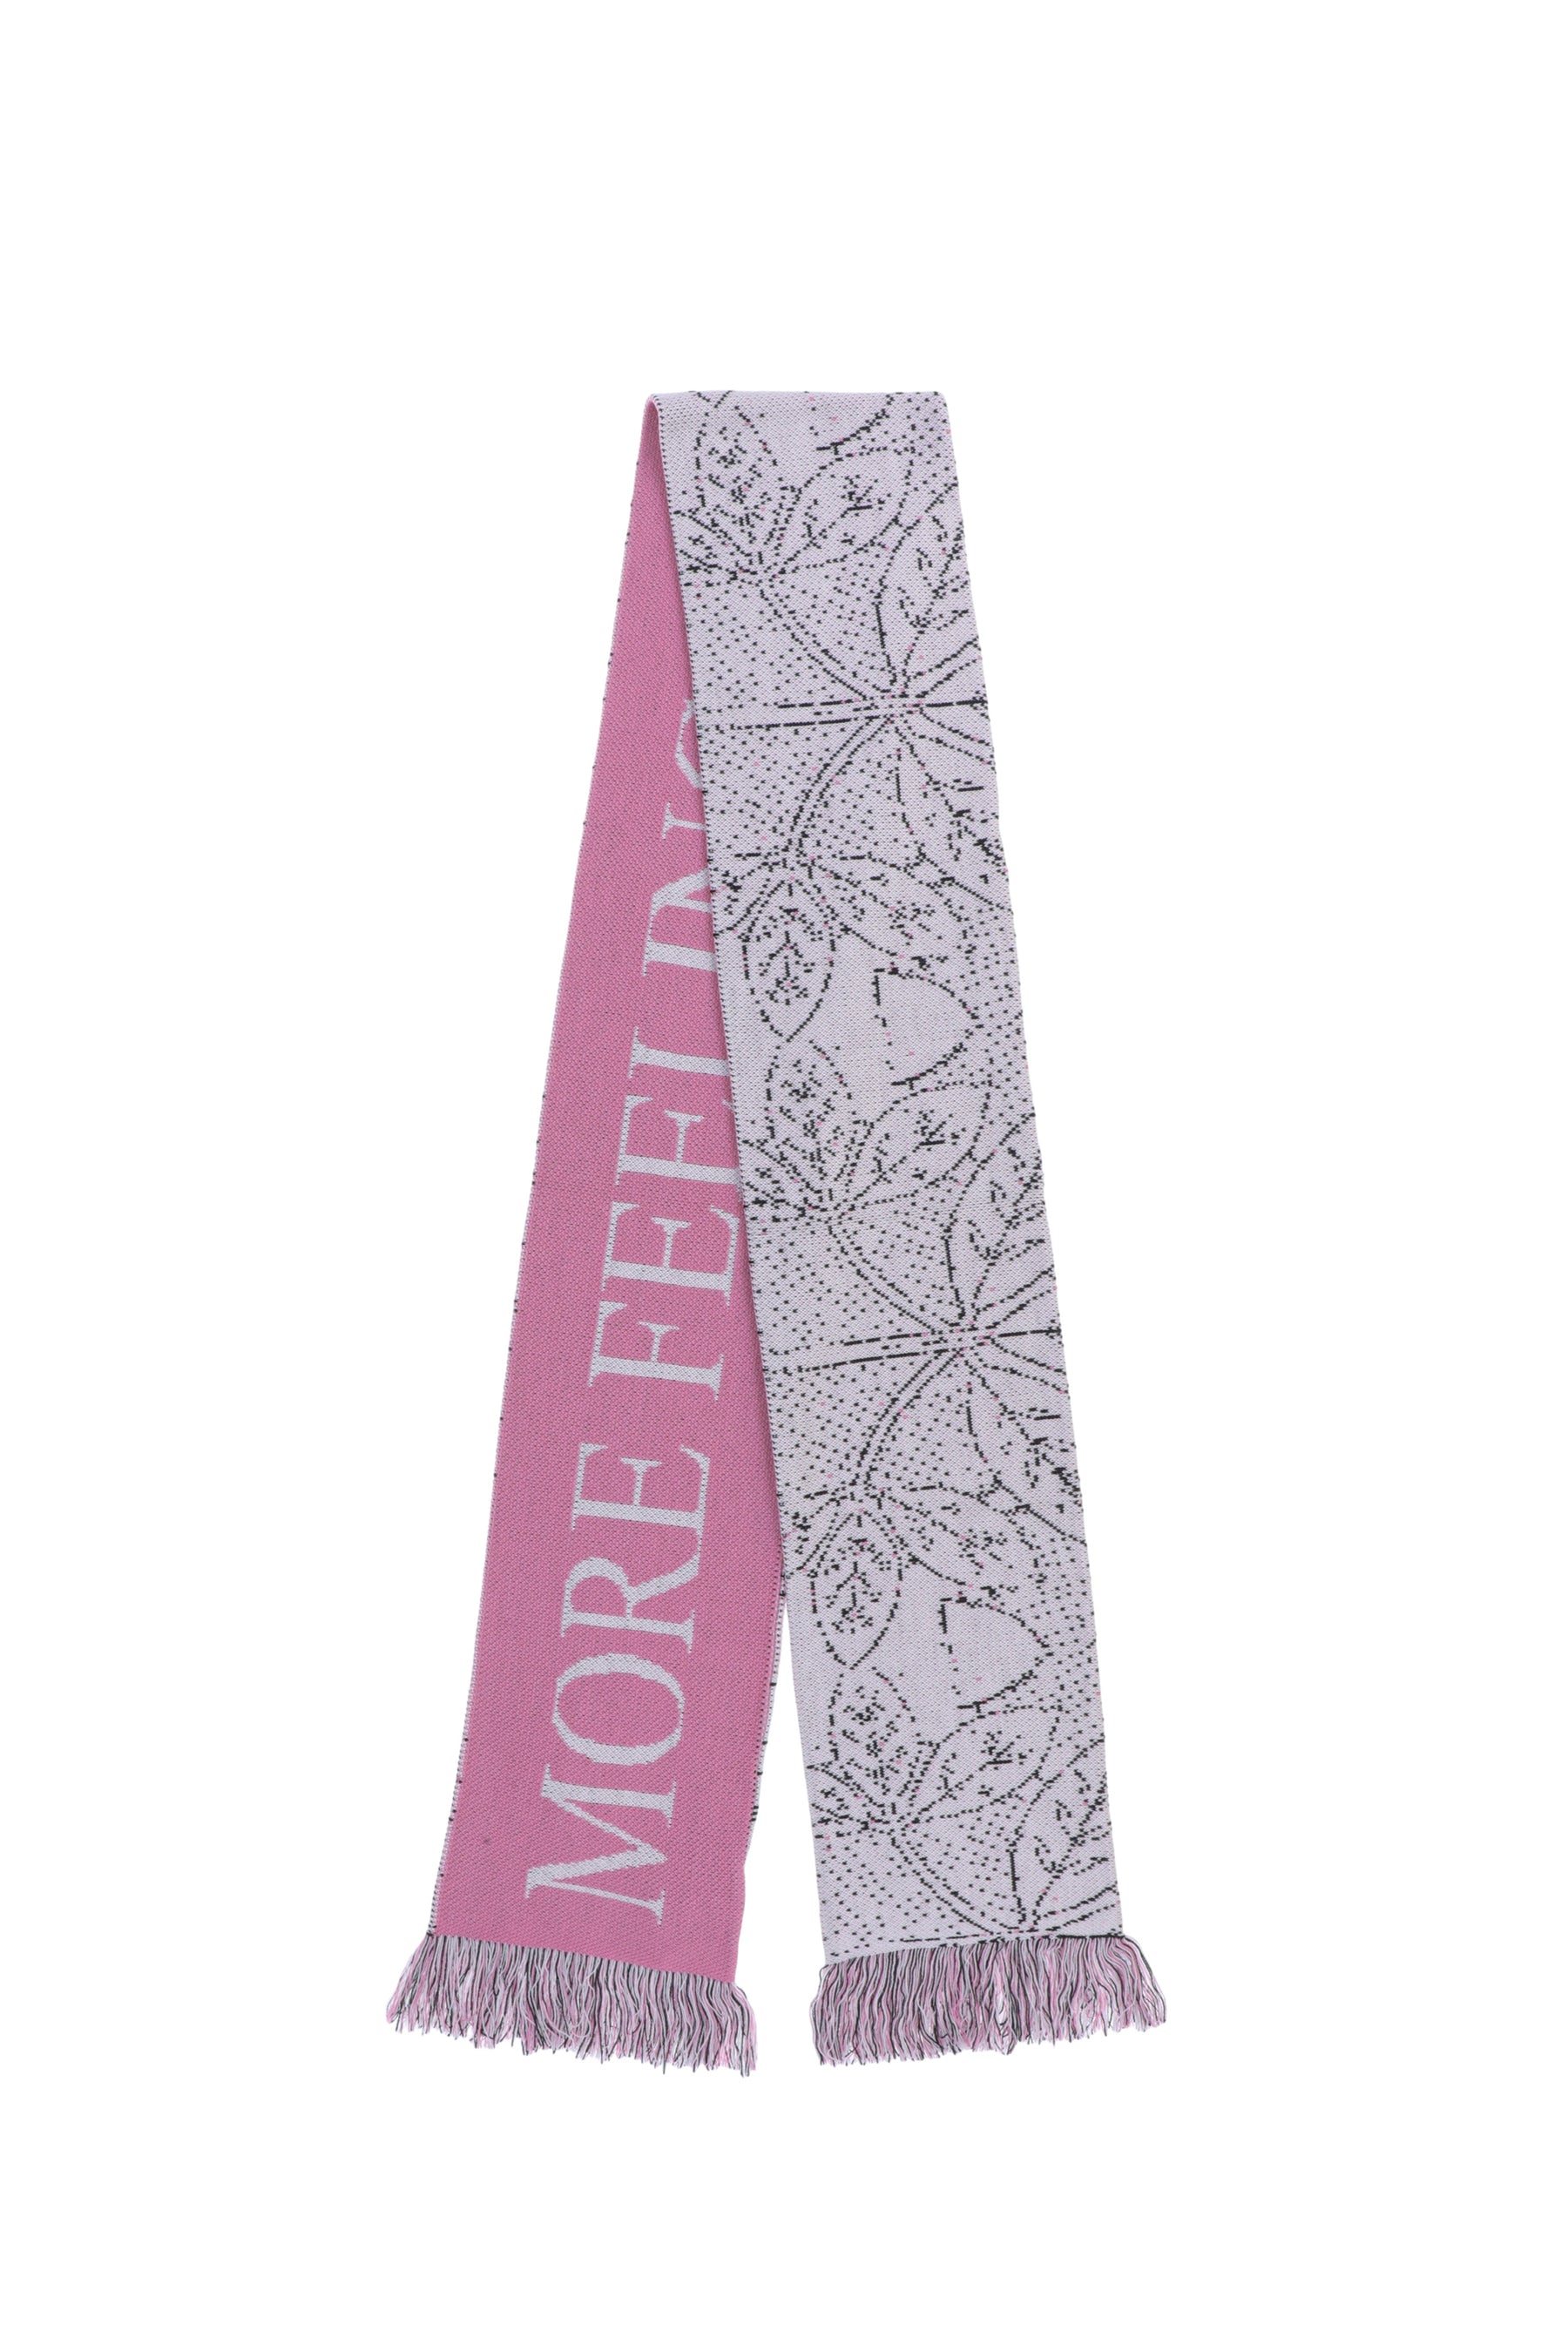 Montmartre New York モンマルトル ニューヨーク MOST COMMERCIAL PINK